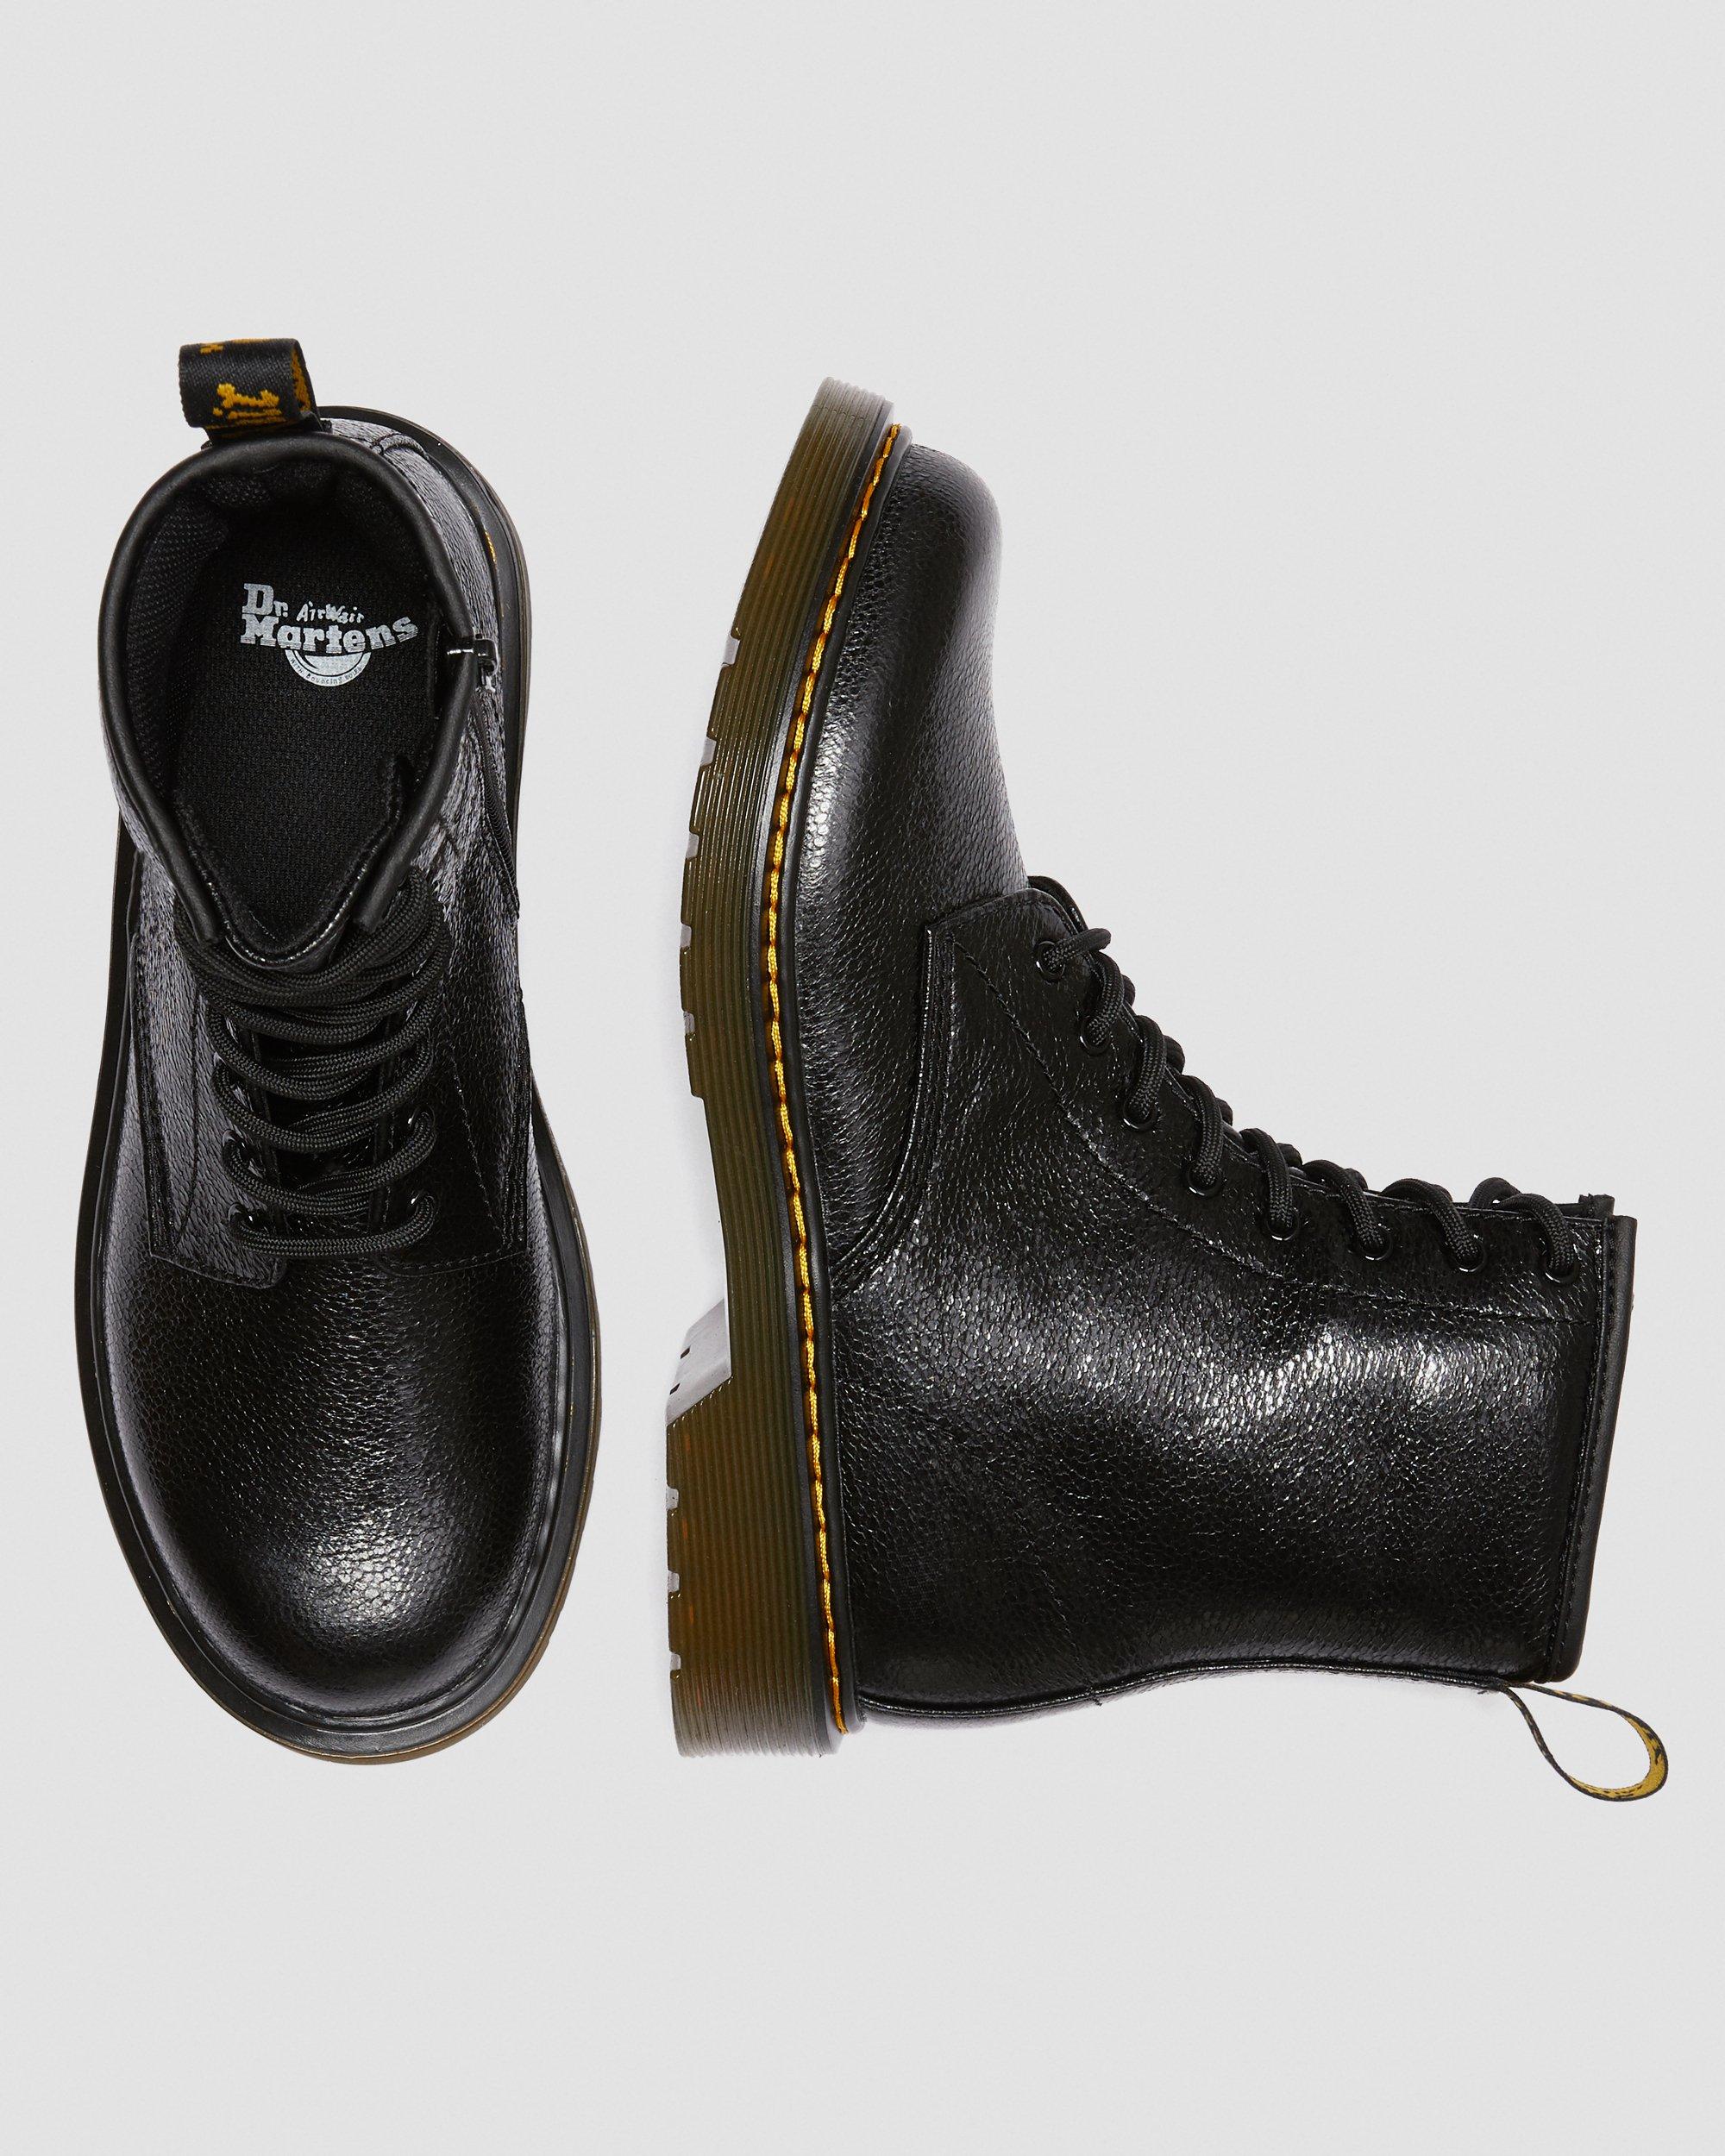 Youth 1460 Crinkle Metallic Lace Up Boots in Black | Dr. Martens